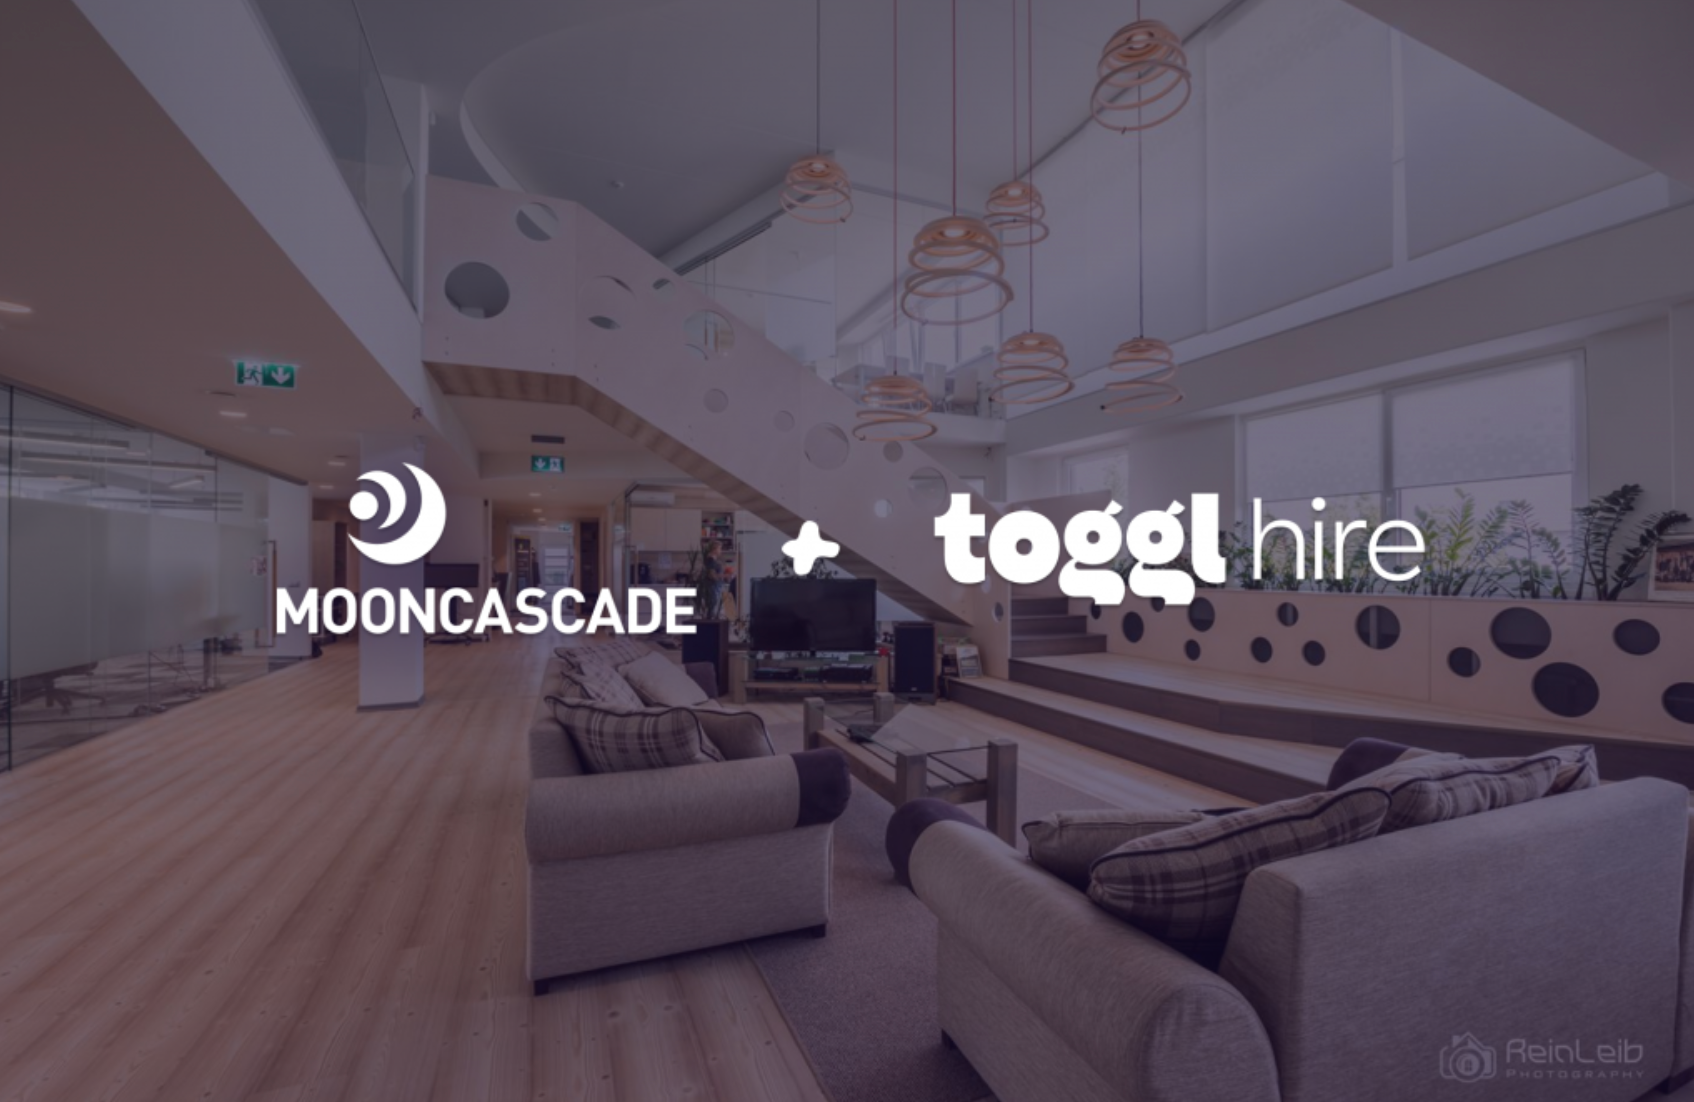 Mooncascade and toggl hire logos overlayed on image of big lounge